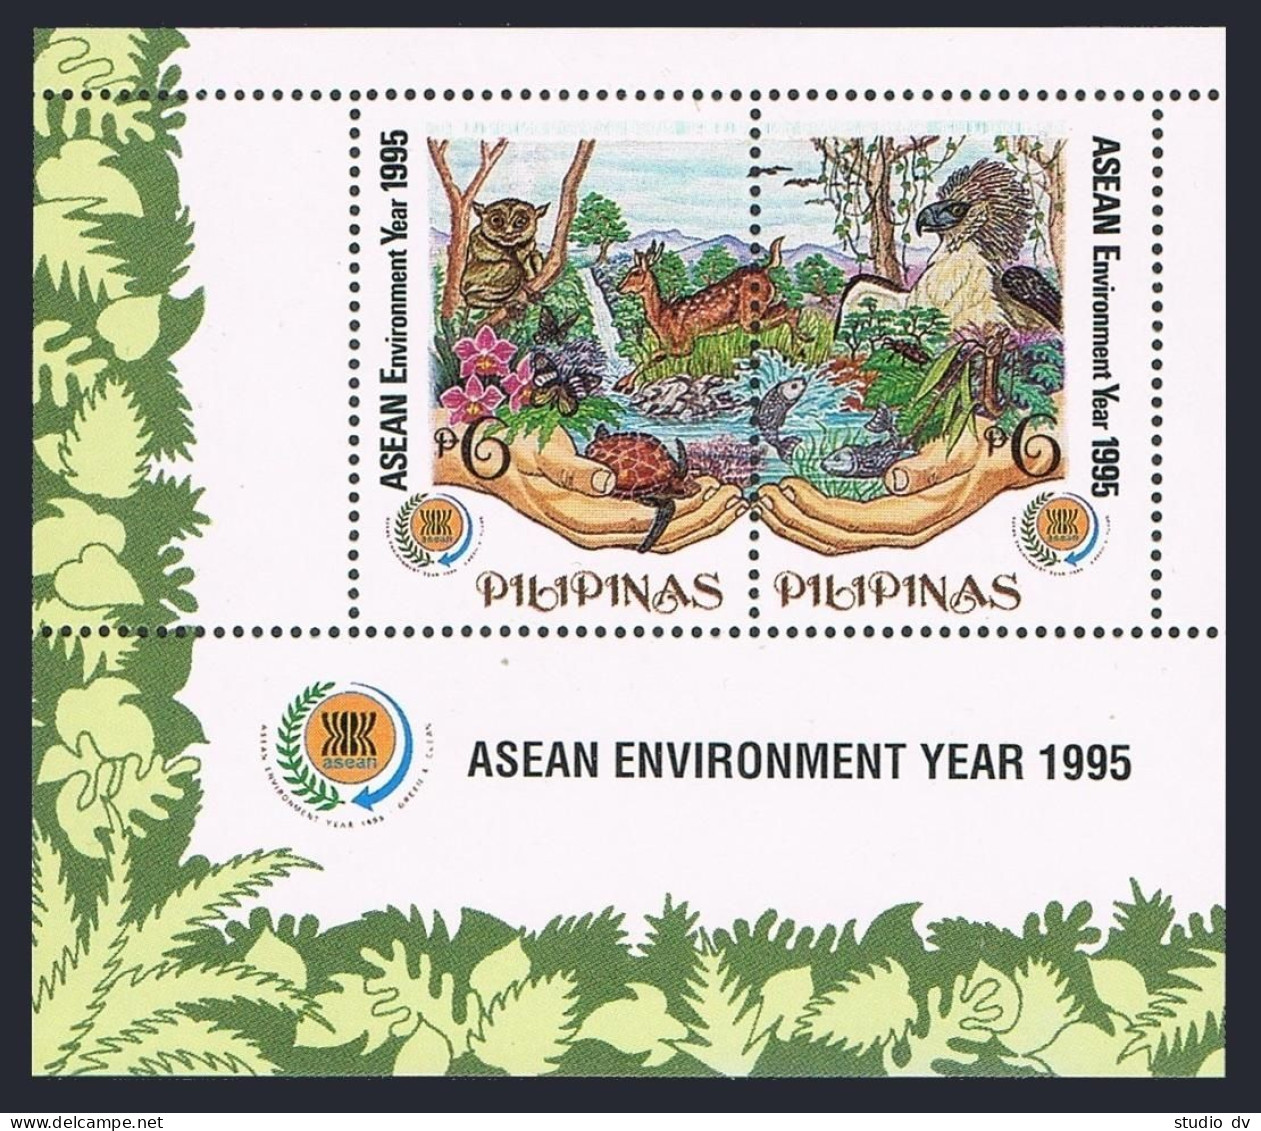 Philippines 2365-2366,MNH.ASEAN Year 1995.Turtle,Butterfly,Fish,Bird,Beetle. - Philippines